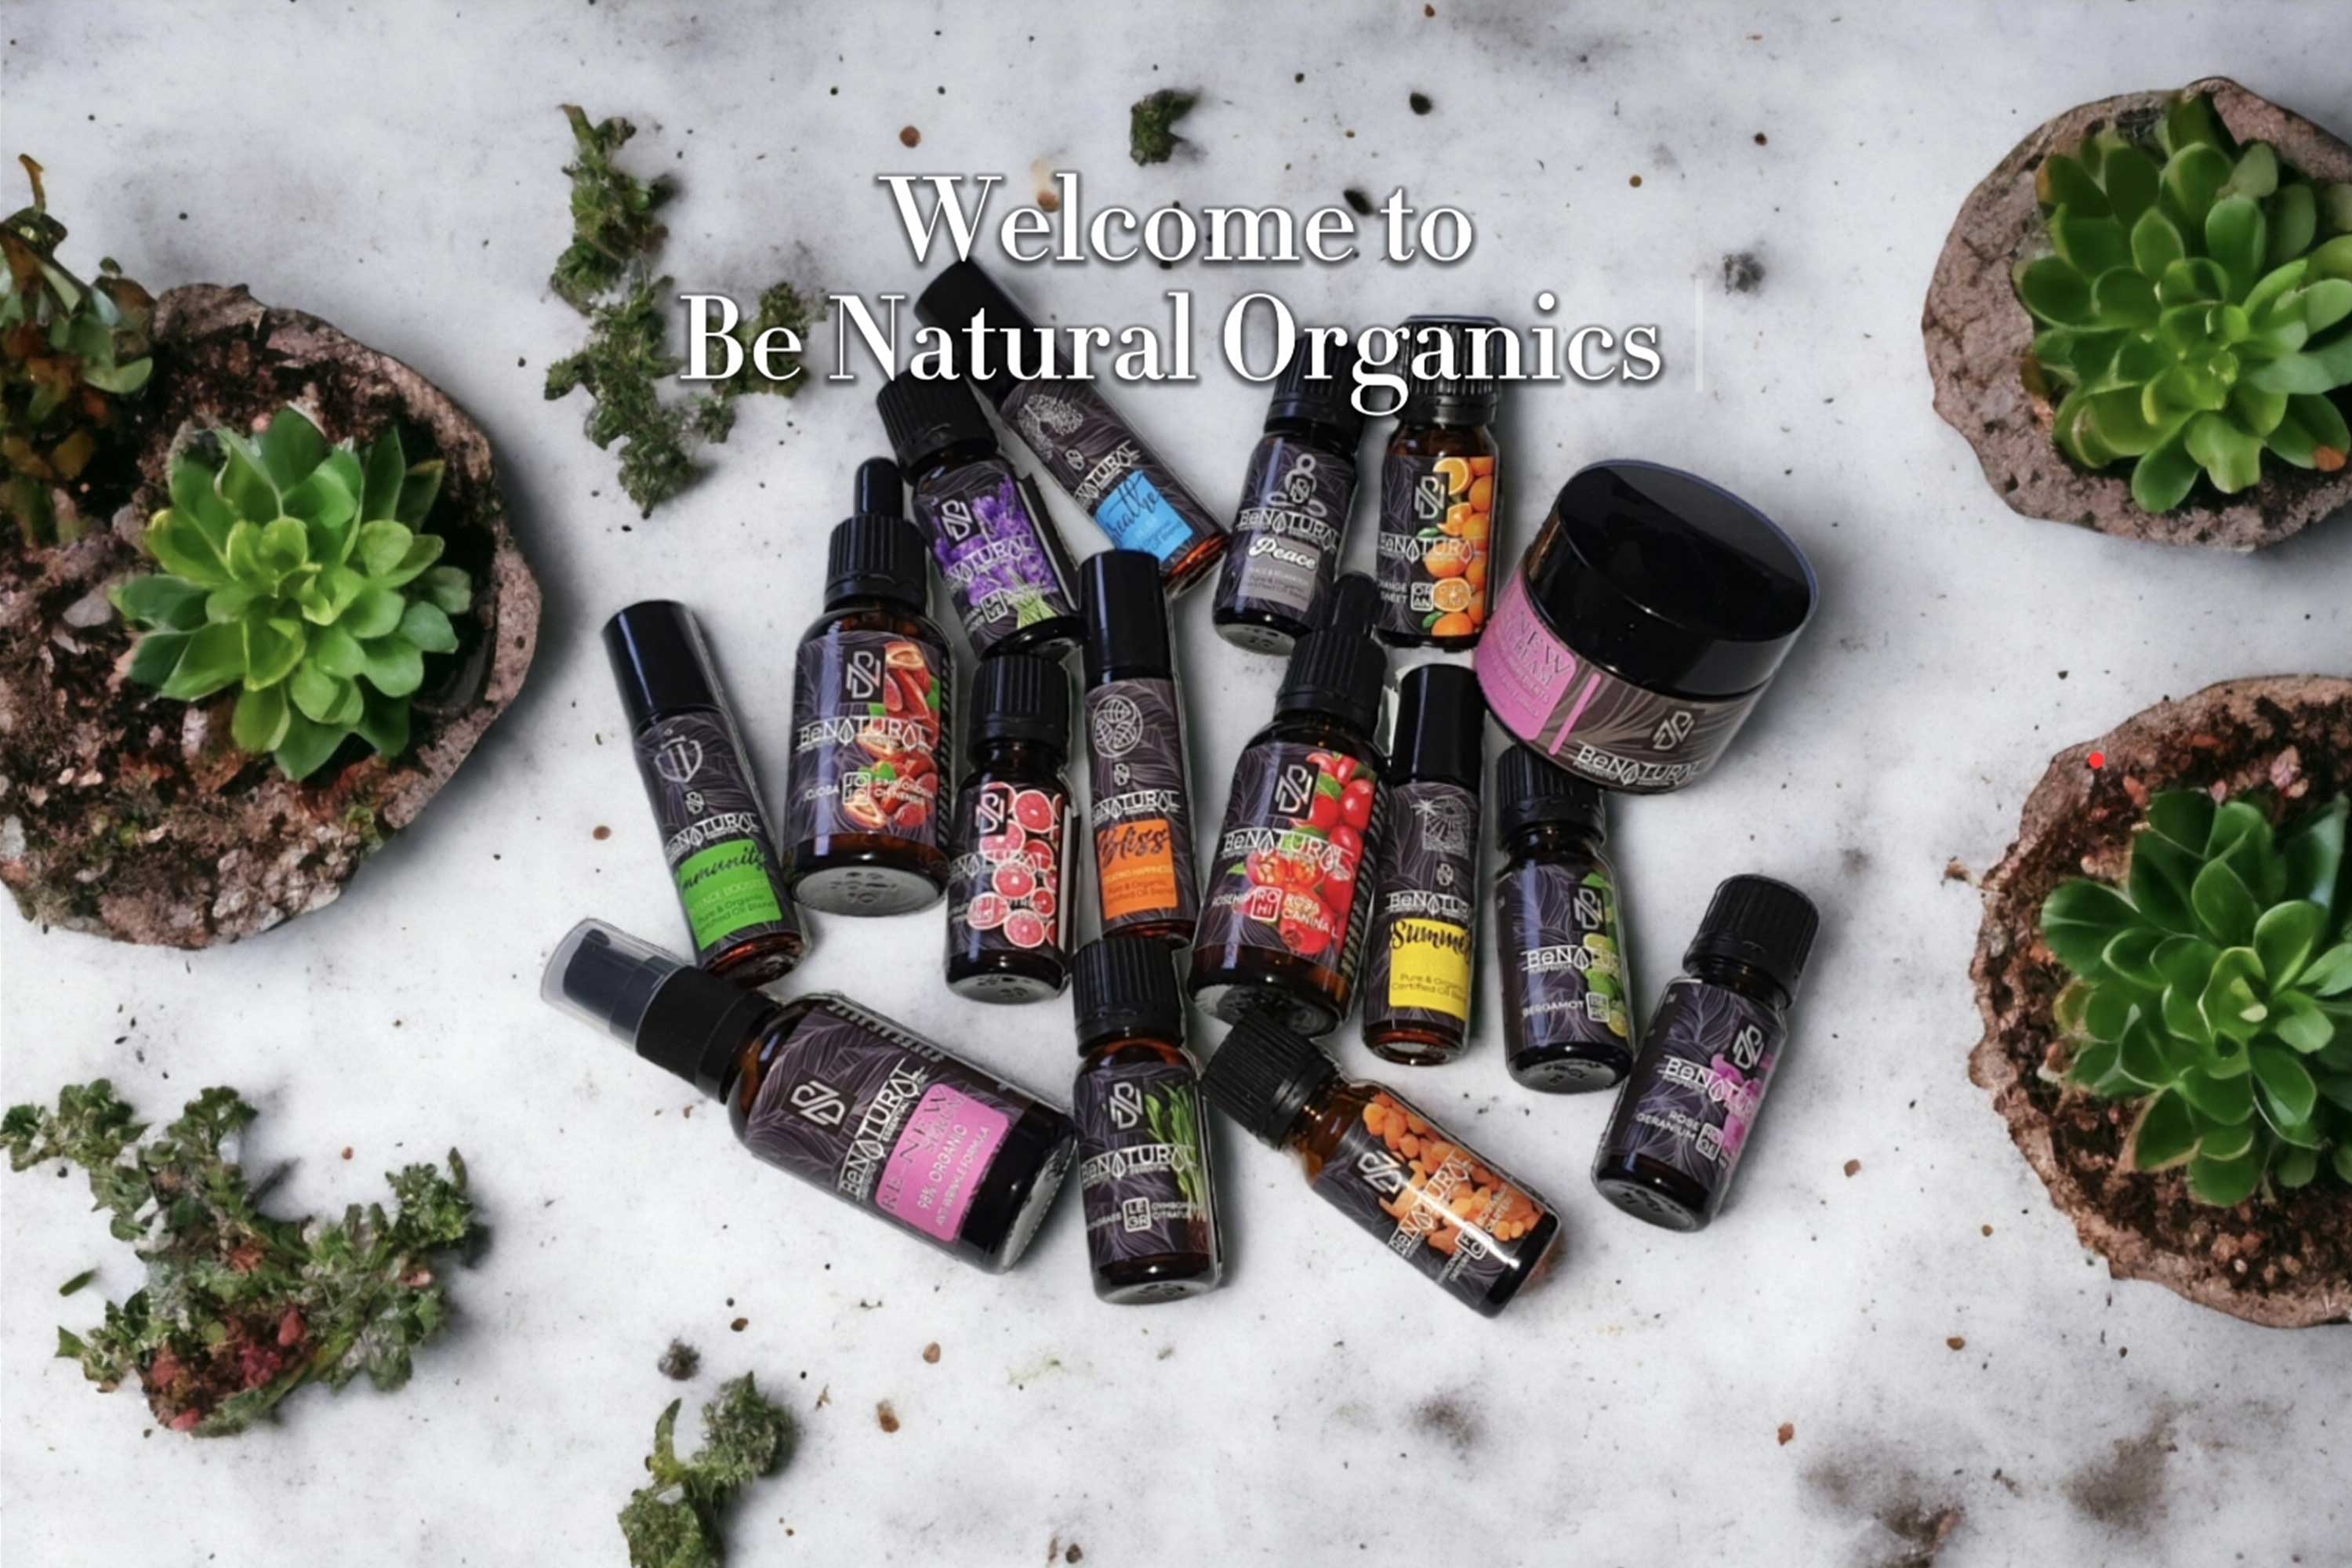 Be Natural Organics Welcome page